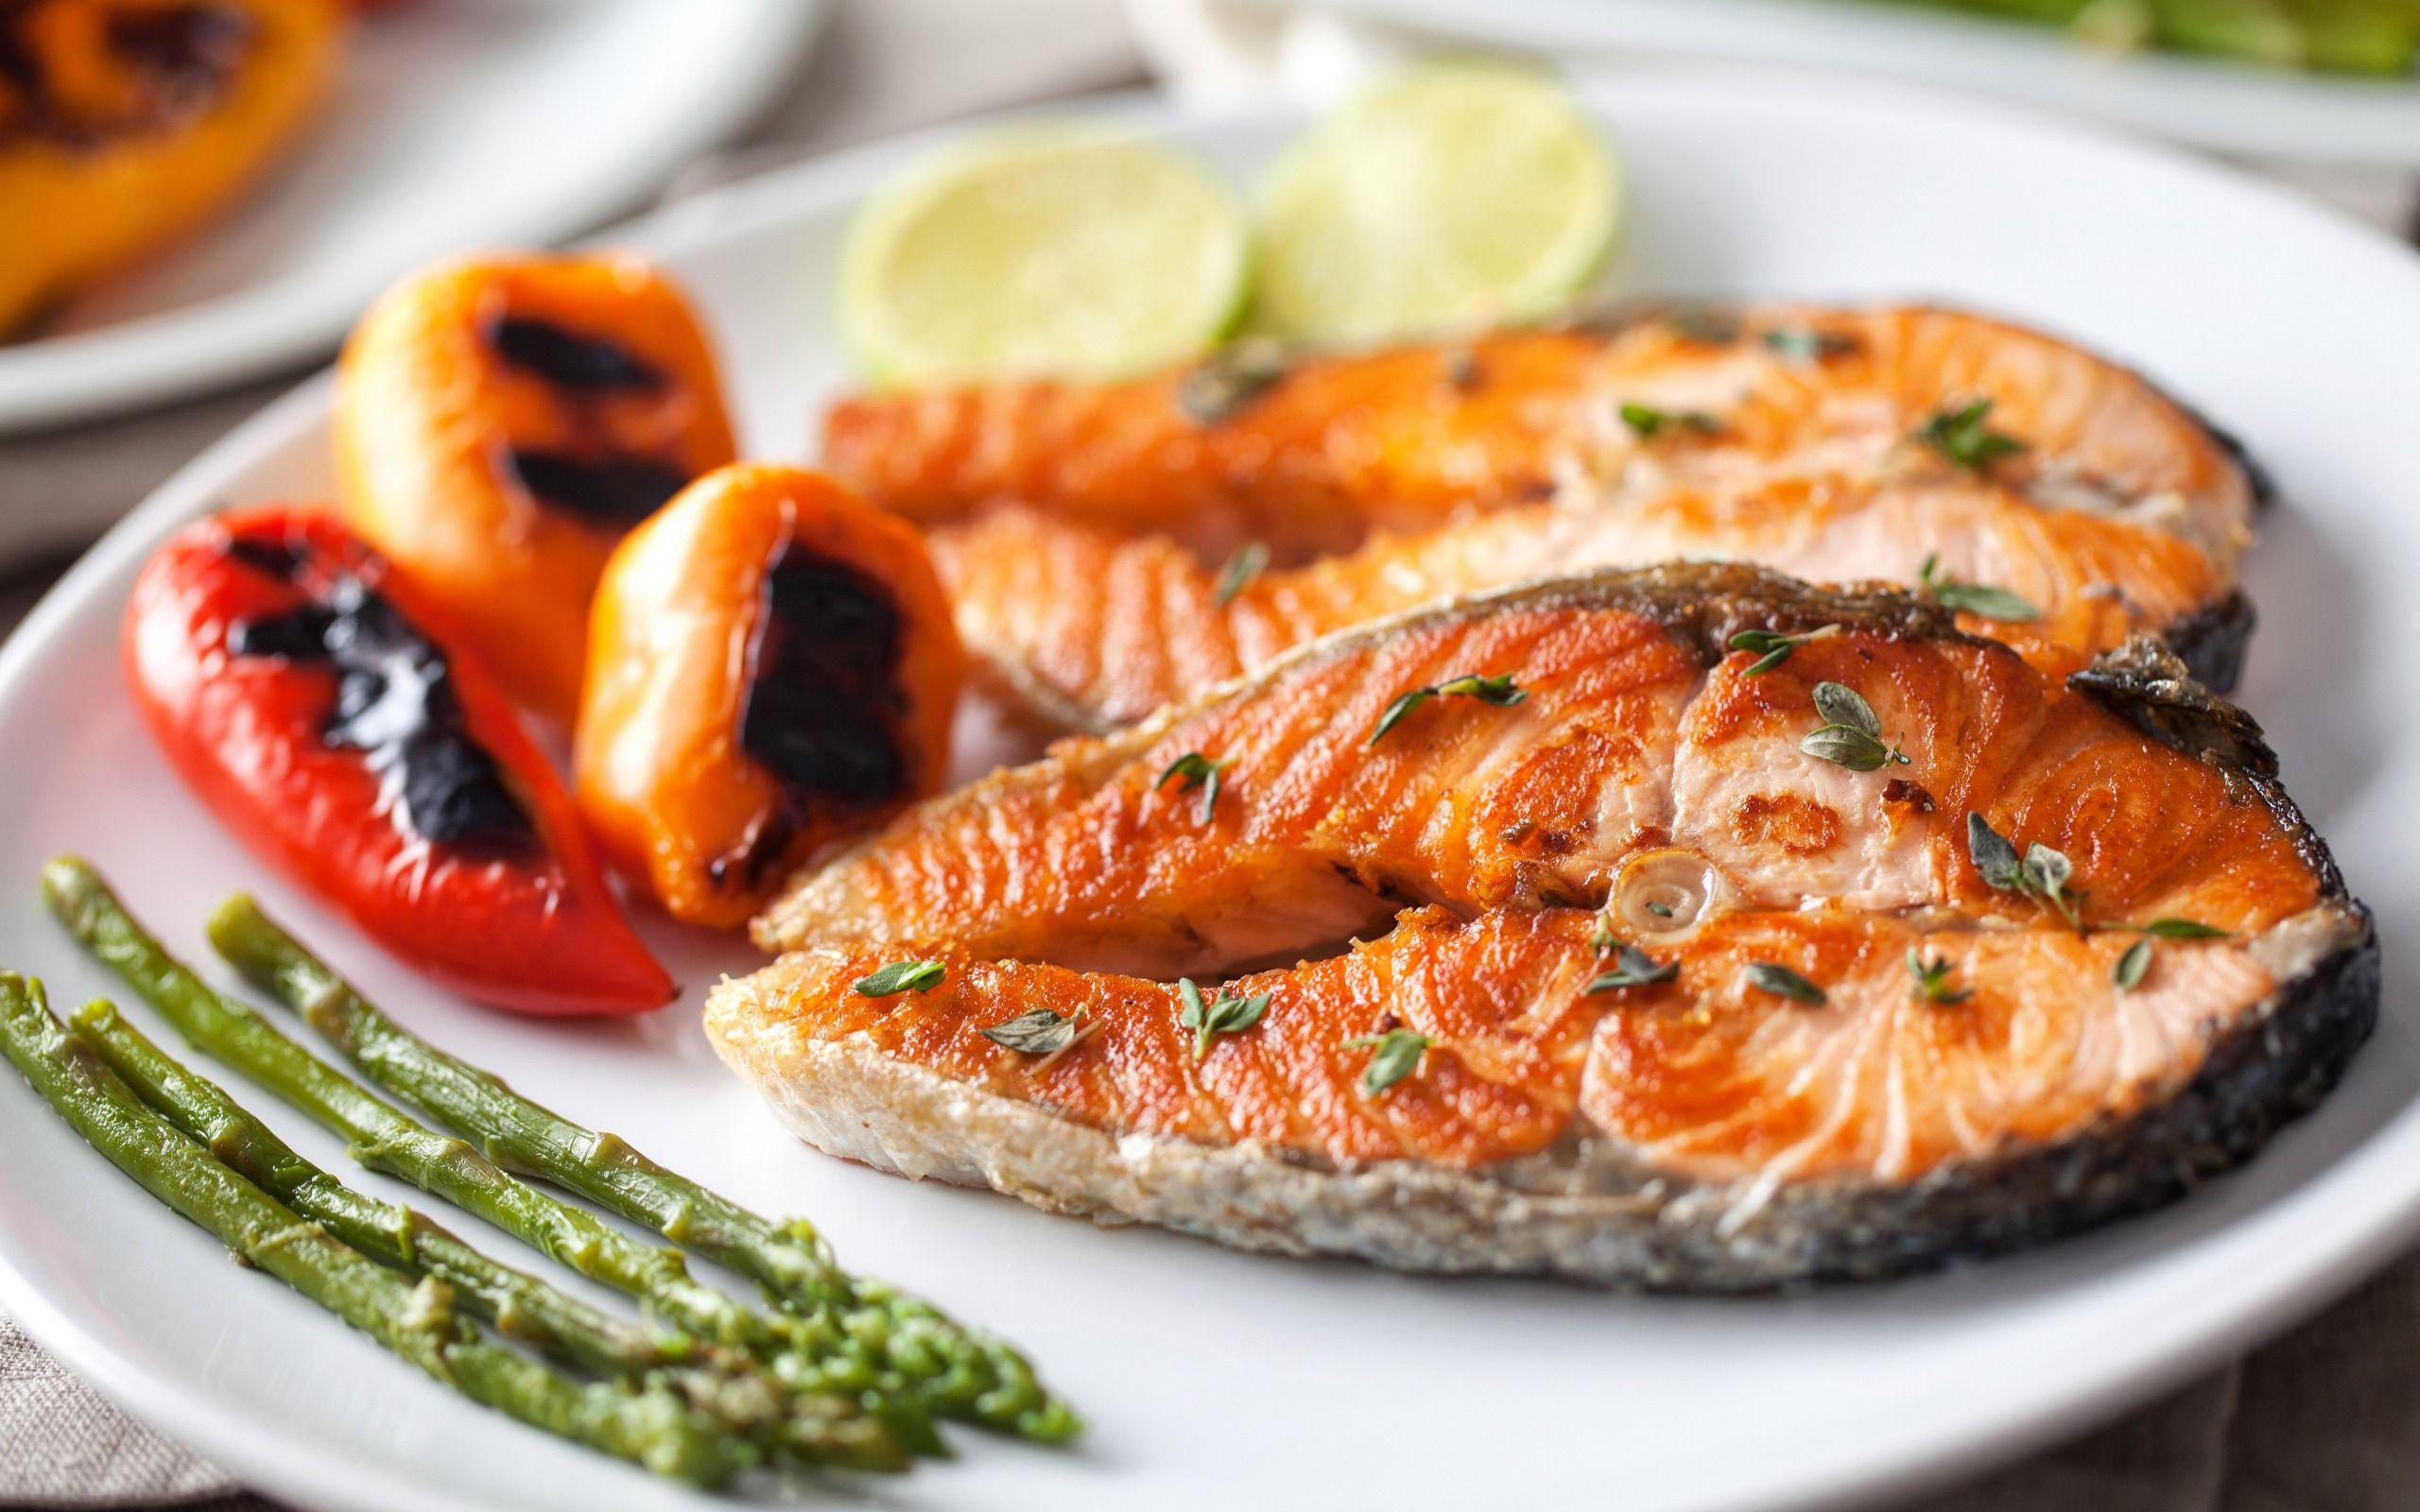 Download wallpaper Fried fish, grilled salmon, seafood, fish dishes